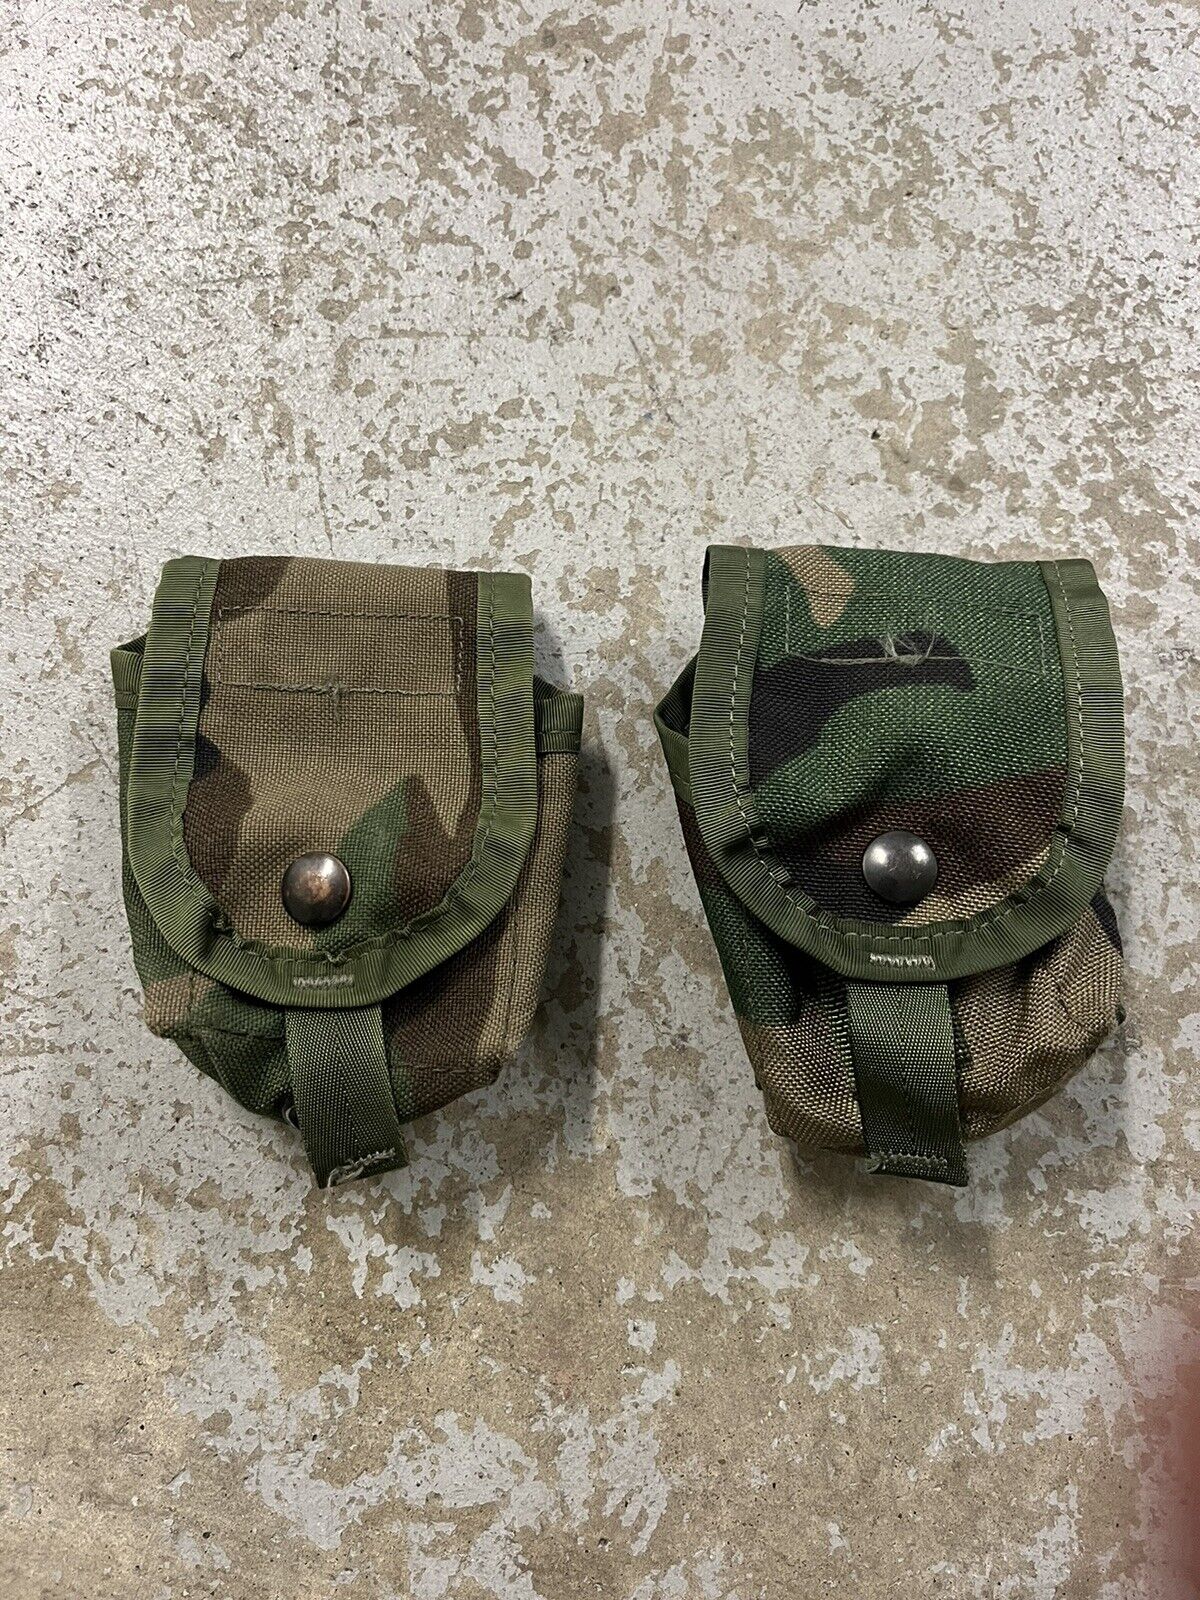 2x Specialty Defense Systems USGI MOLLE II HAND GRENADE POUCHES WOODLAND 